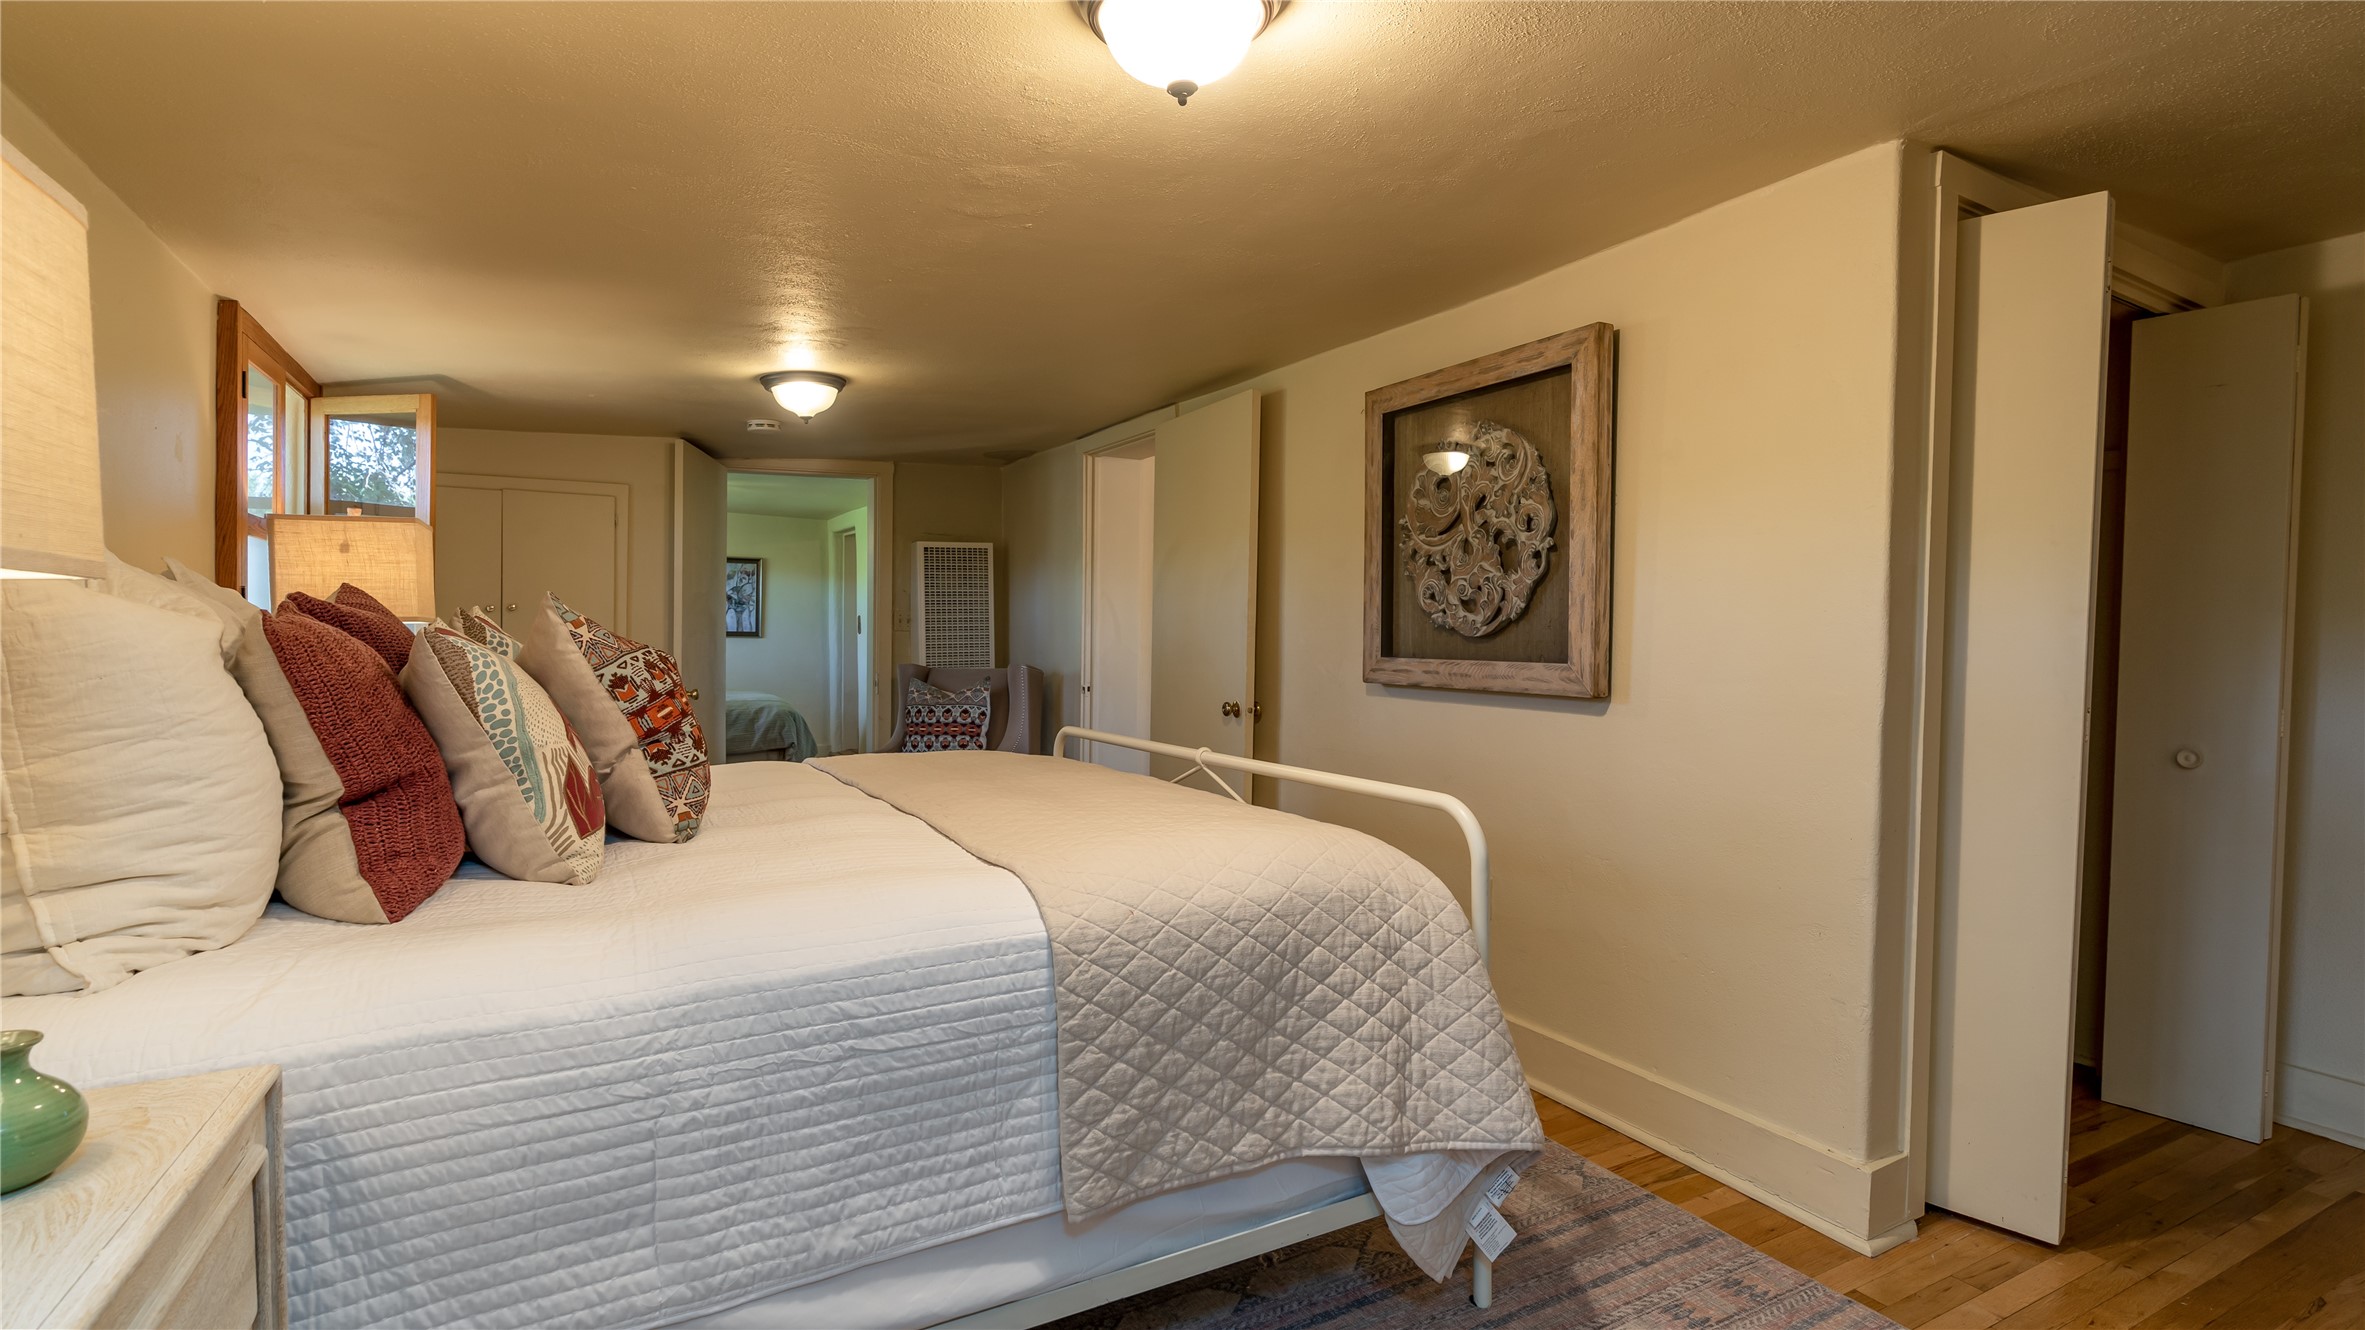 1027 Canyon A, Santa Fe, New Mexico 87501, 2 Bedrooms Bedrooms, ,1 BathroomBathrooms,Residential,For Sale,1027 Canyon A,202232826